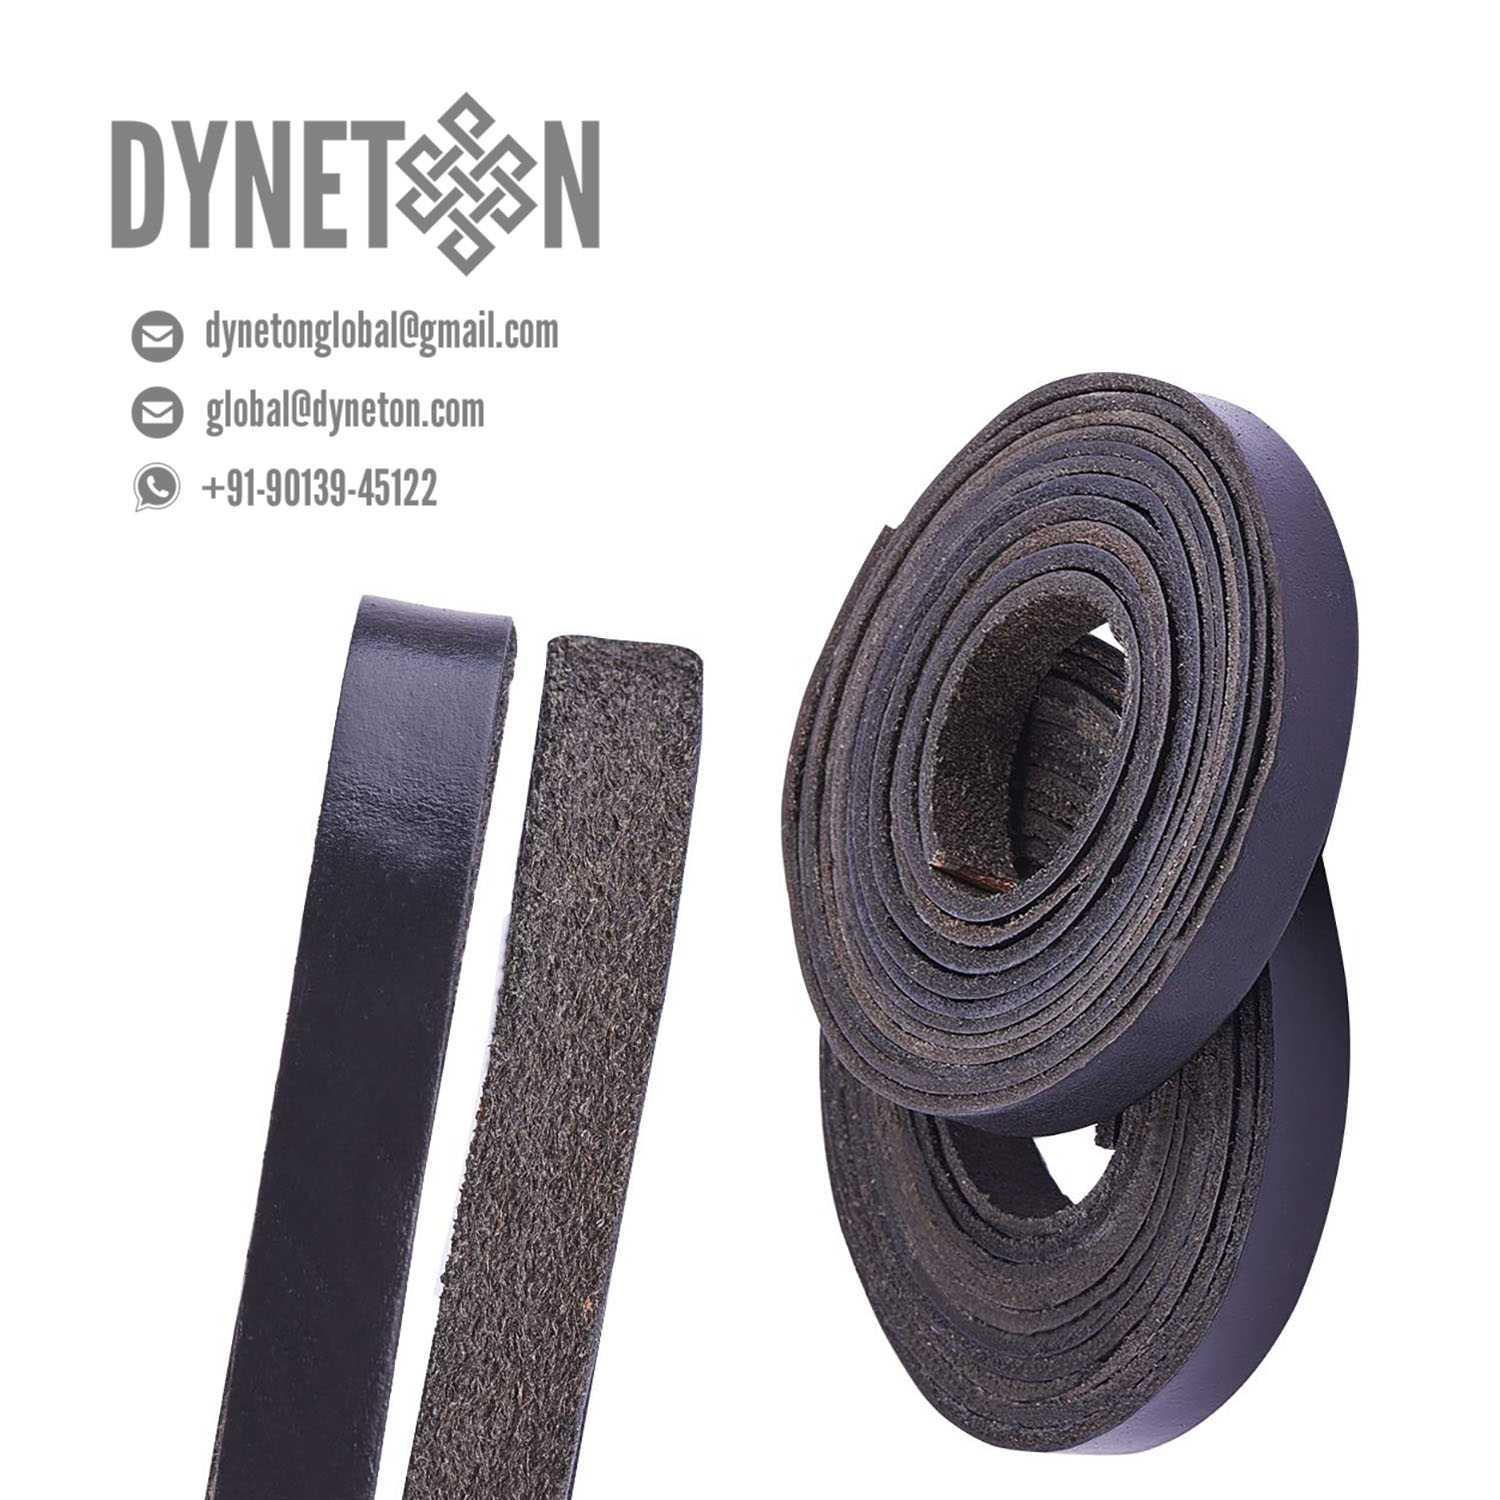 9mm Flat Leather Cord - DYNETON / Flat Leather Cords 9 mm